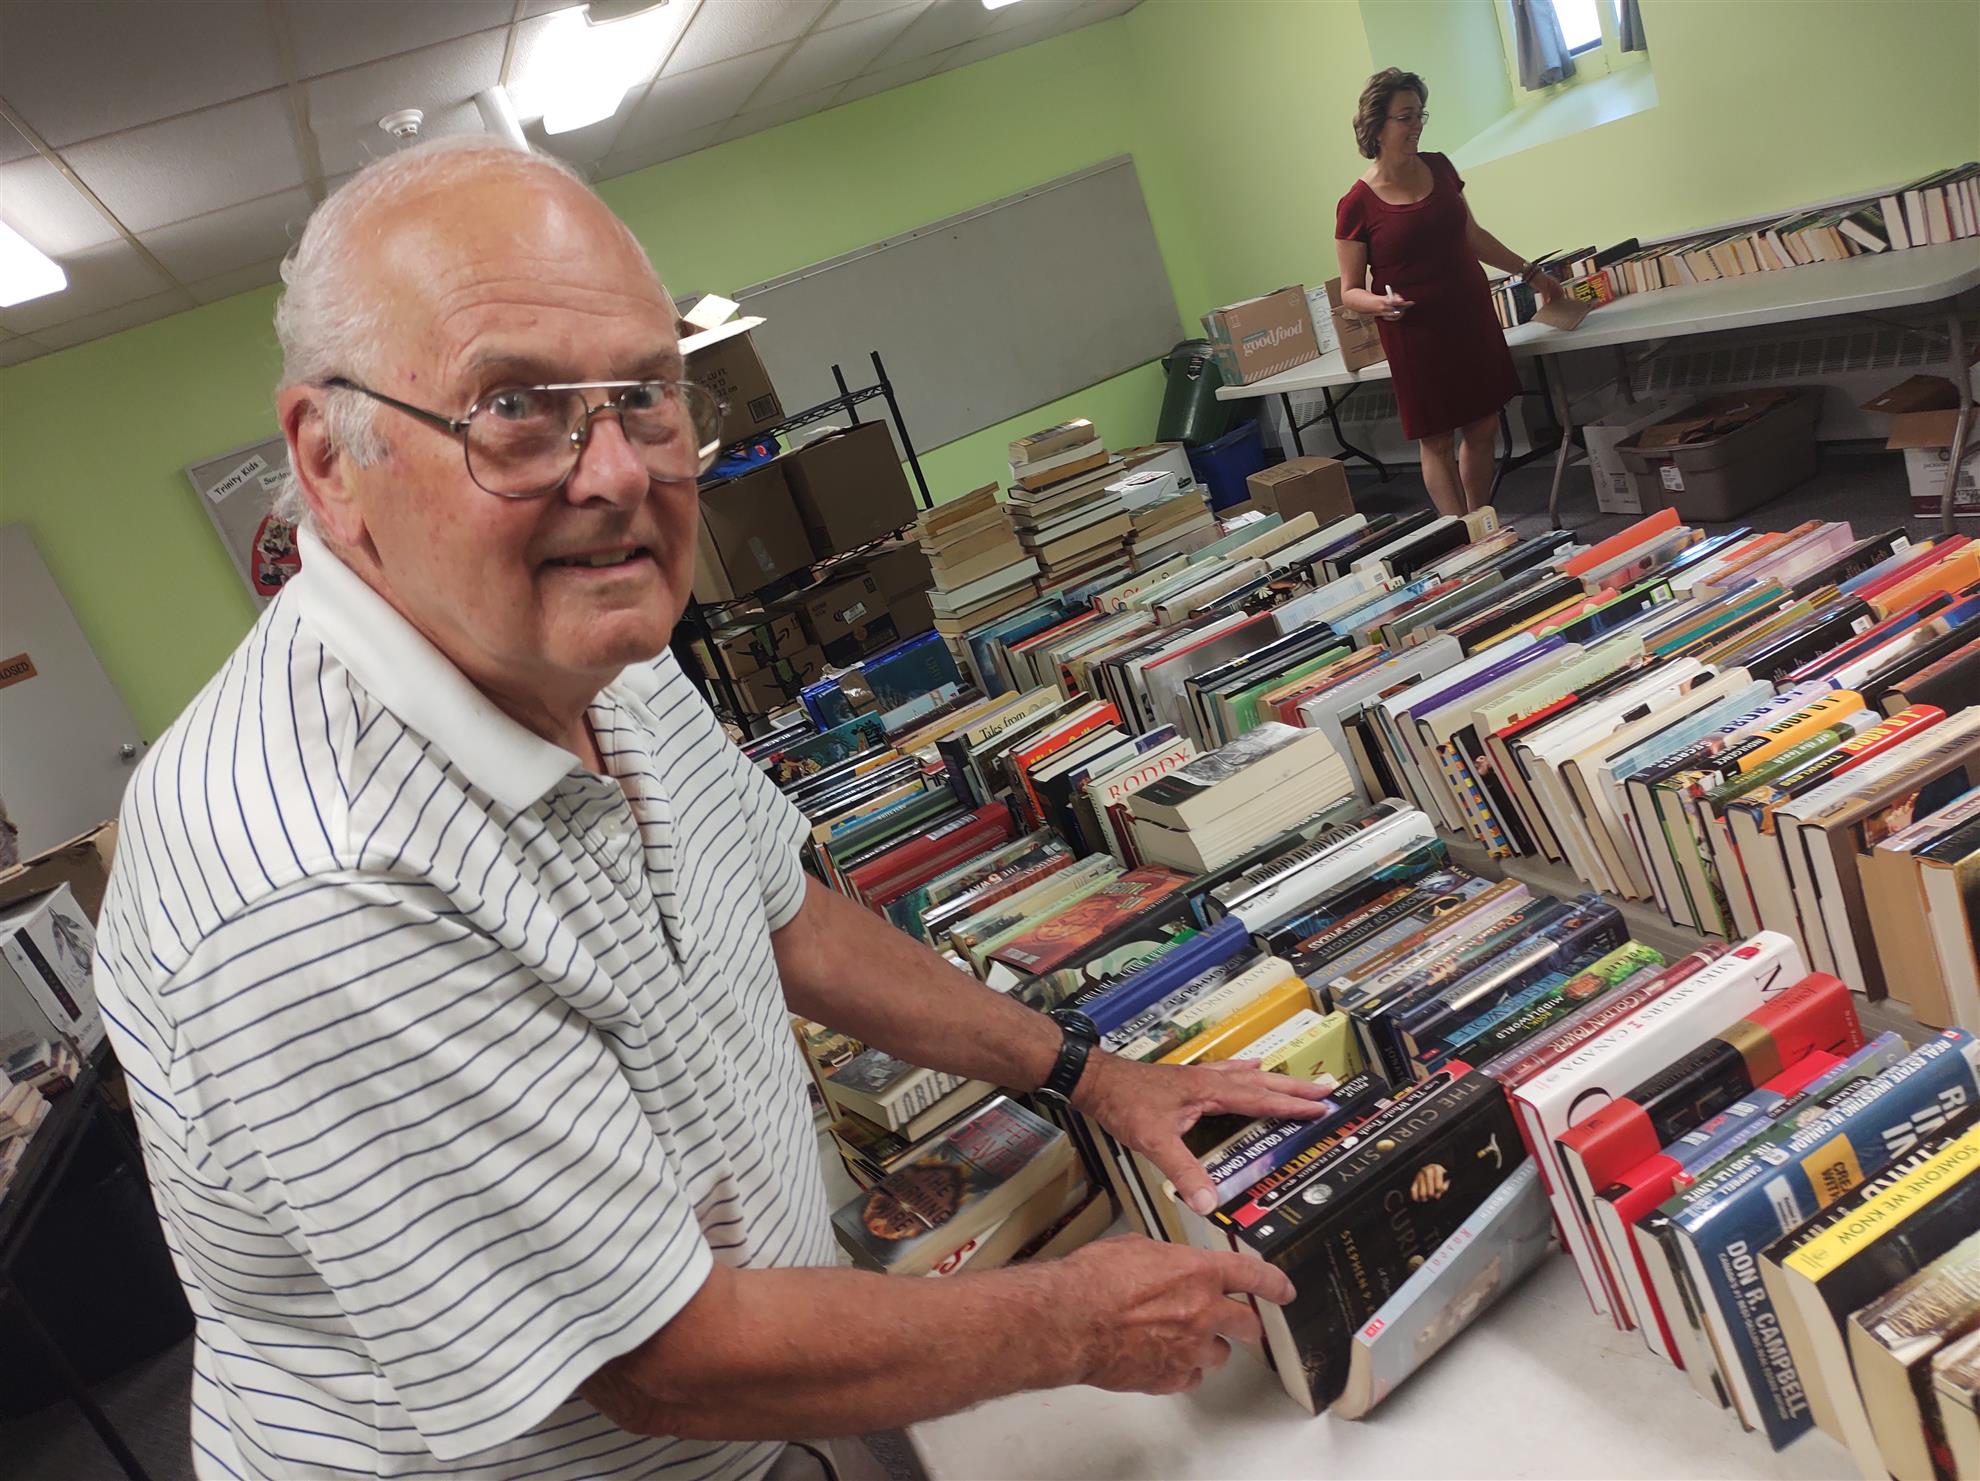 A man smiles for the camera while sorting a table filled with books.